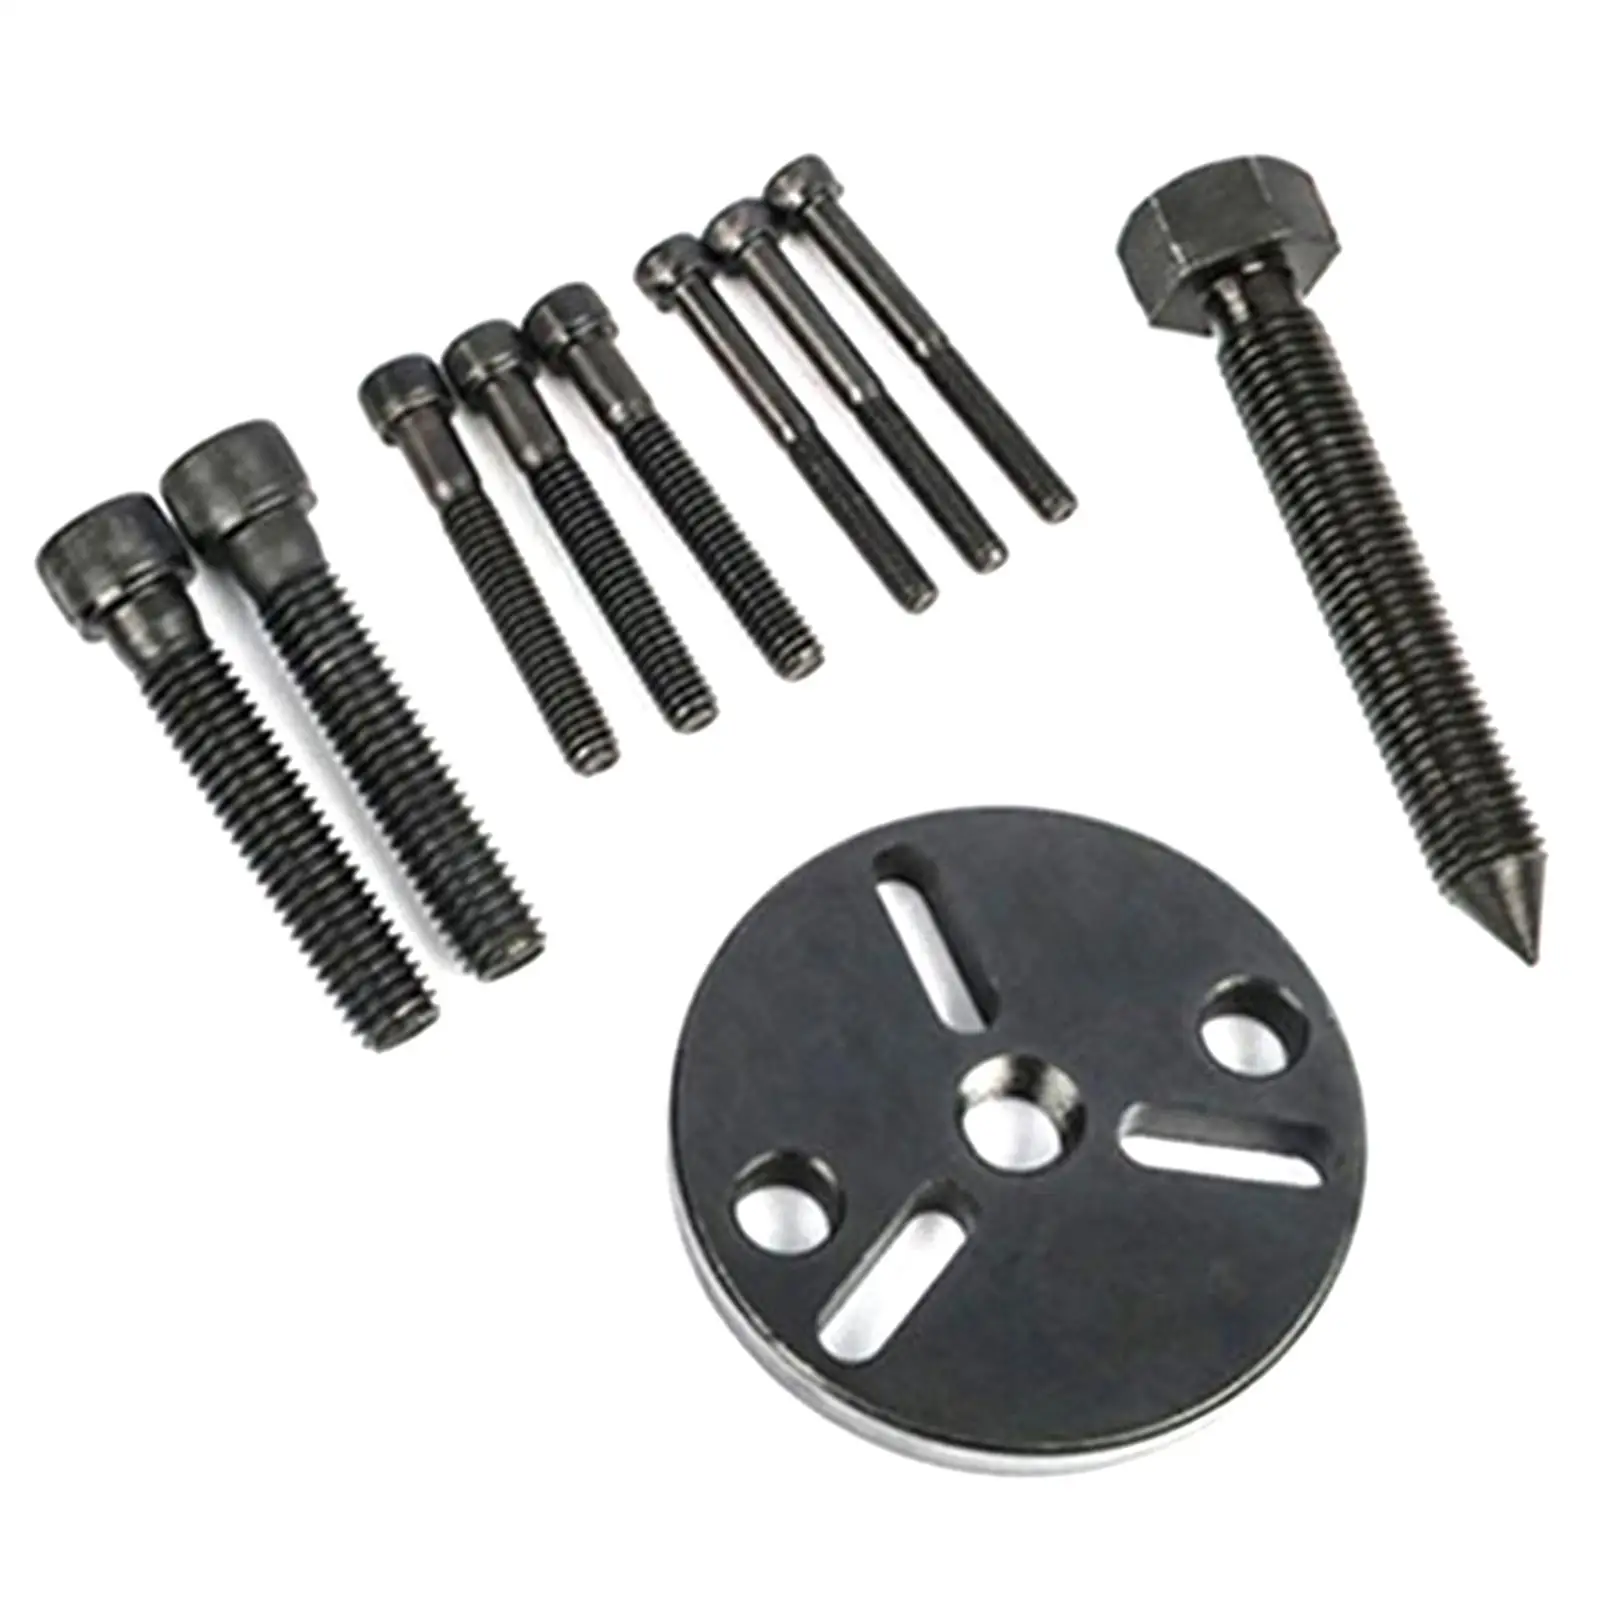 Car Air Conditioning Repair Tool Bearing Disassembly Tool Time Saving Steel Compressor Clutch Remover Kit for Various Cars